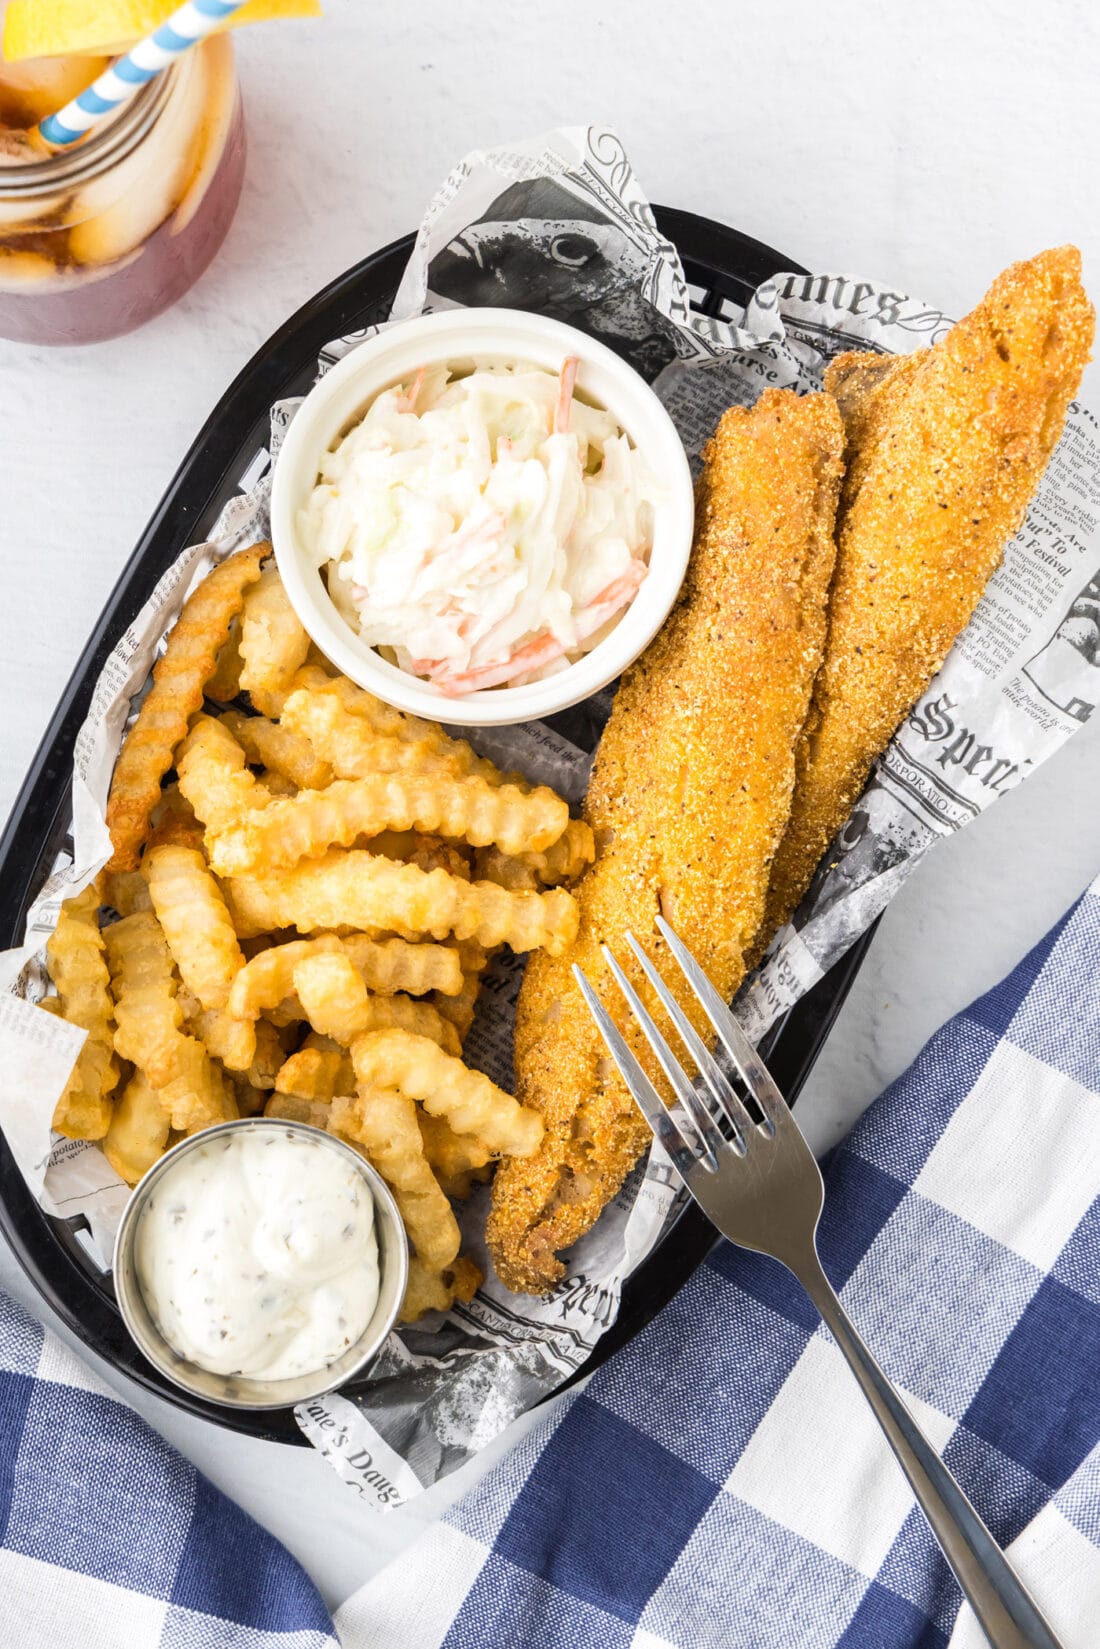 Basket of Fried Whiting Fish with fries and coleslaw 